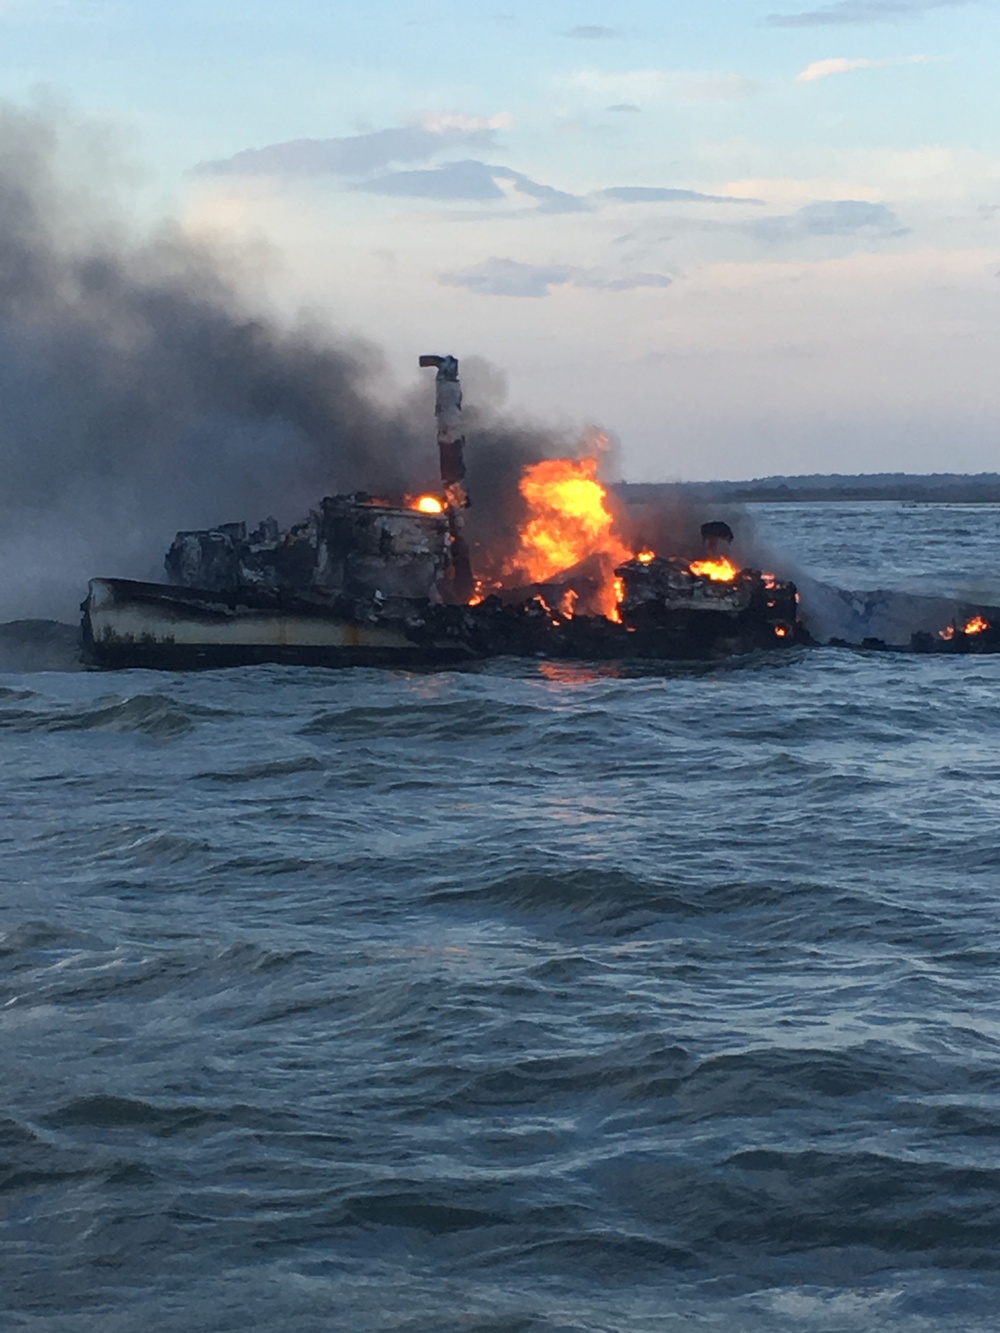 Coast Guard rescues 3 fishermen after vessel catches fire near St. Catherines Island